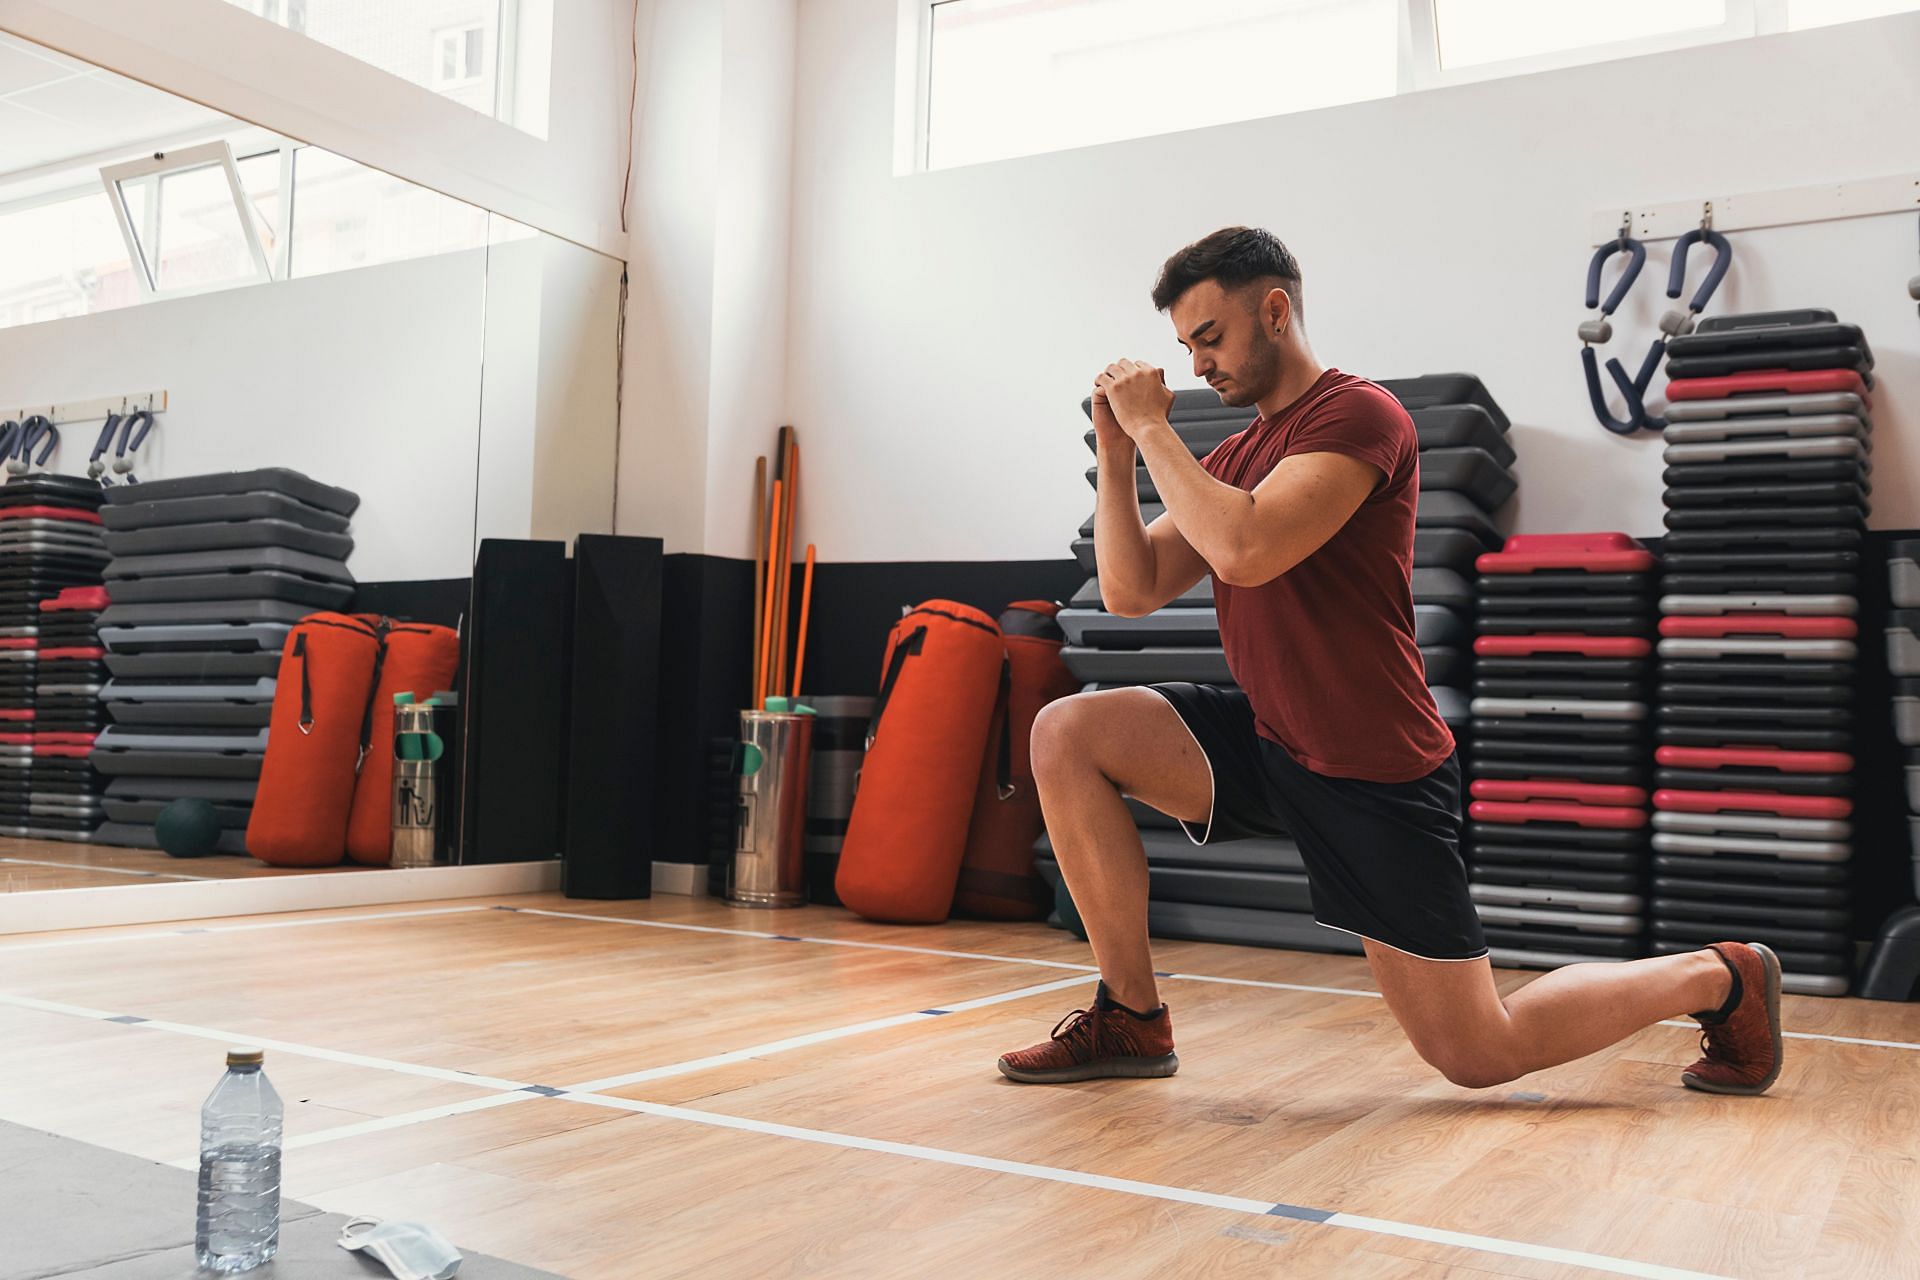 Want to build abs? Try these five effective bodyweight exercises. (Image via Unsplash / Sergio Carpintero)